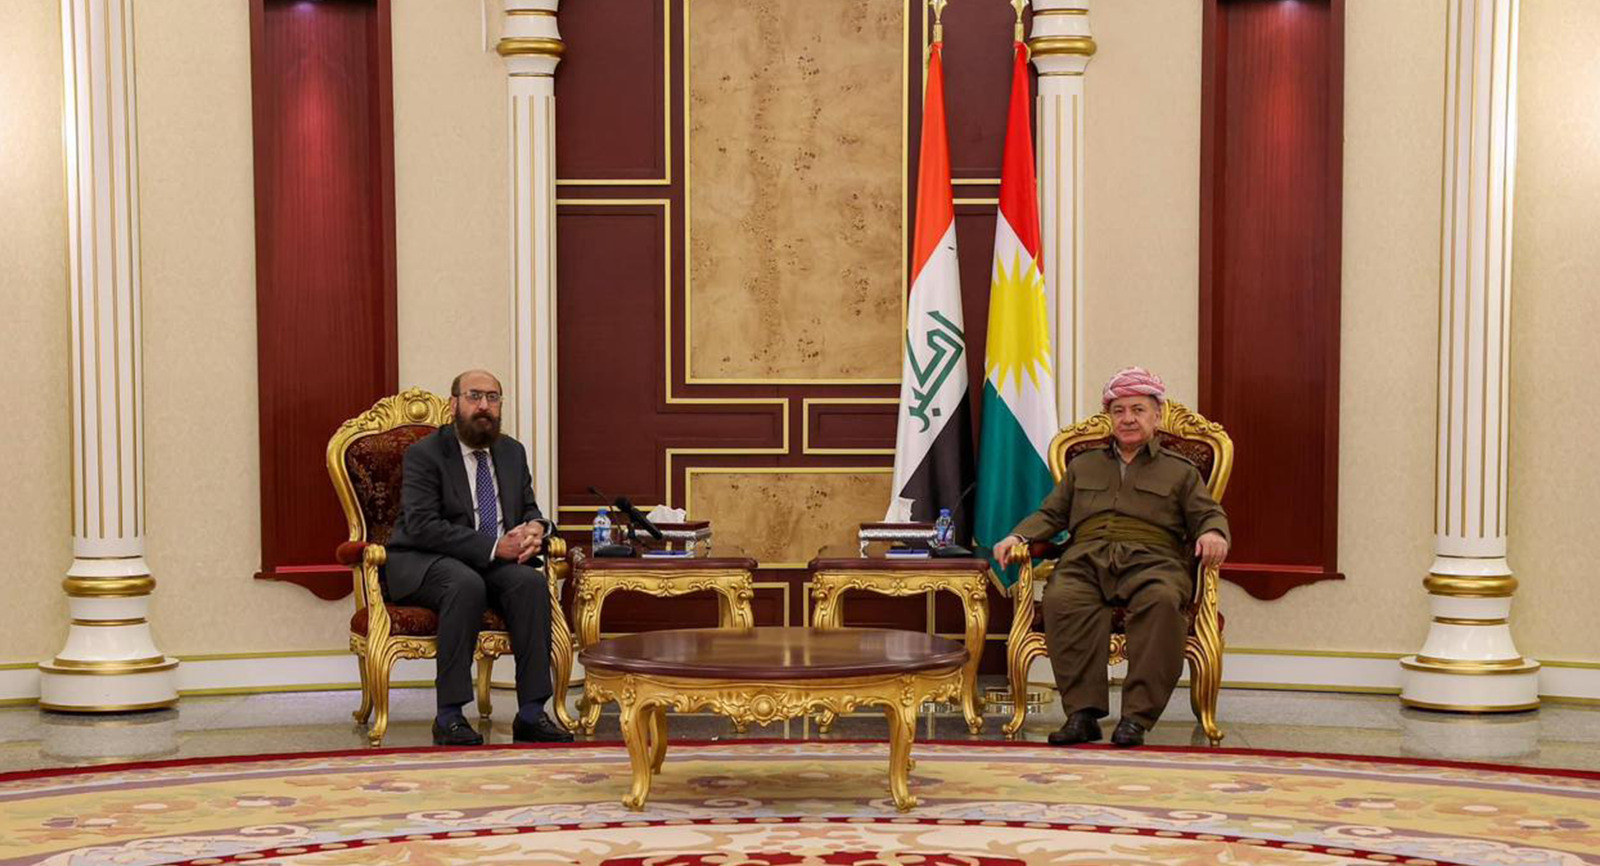 Masoud Barzani calls for implementing the Sinjar agreement